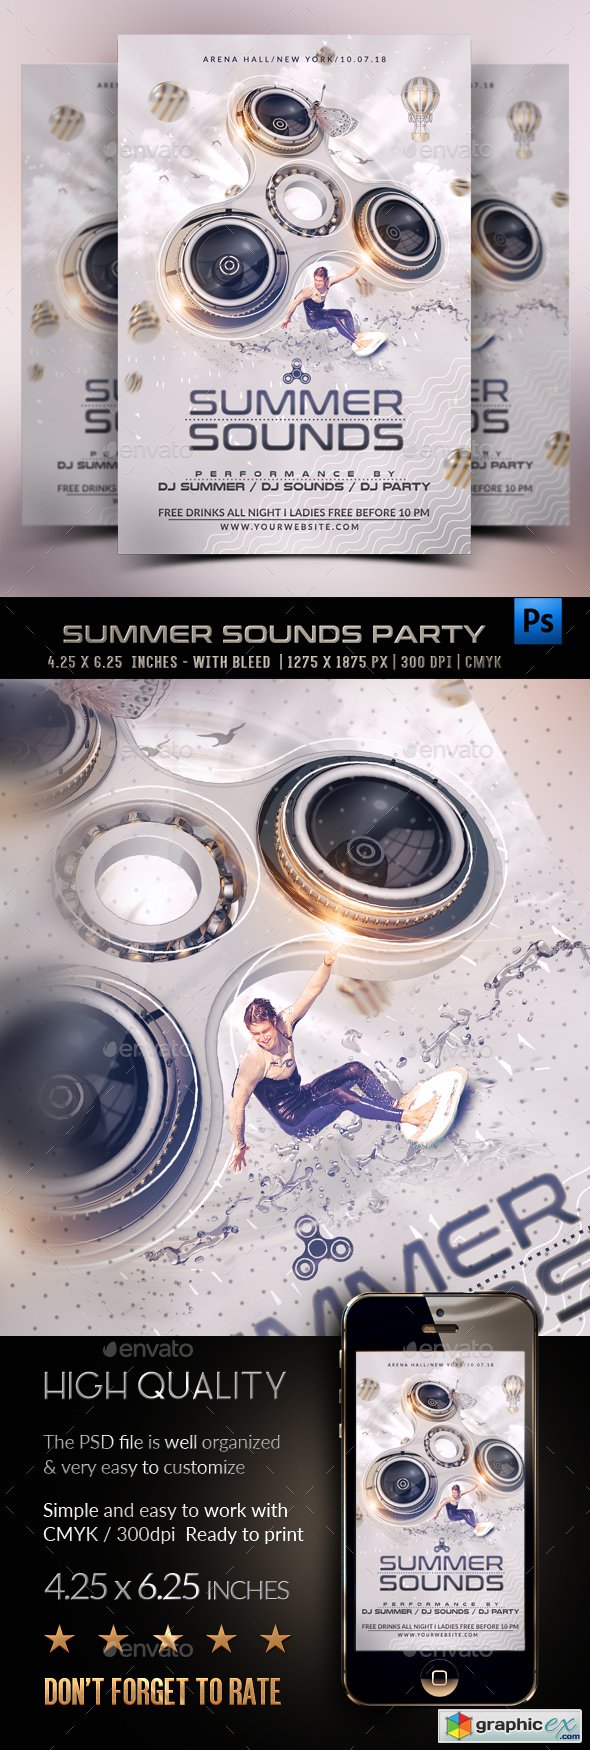 Summer Sounds Party Flyer